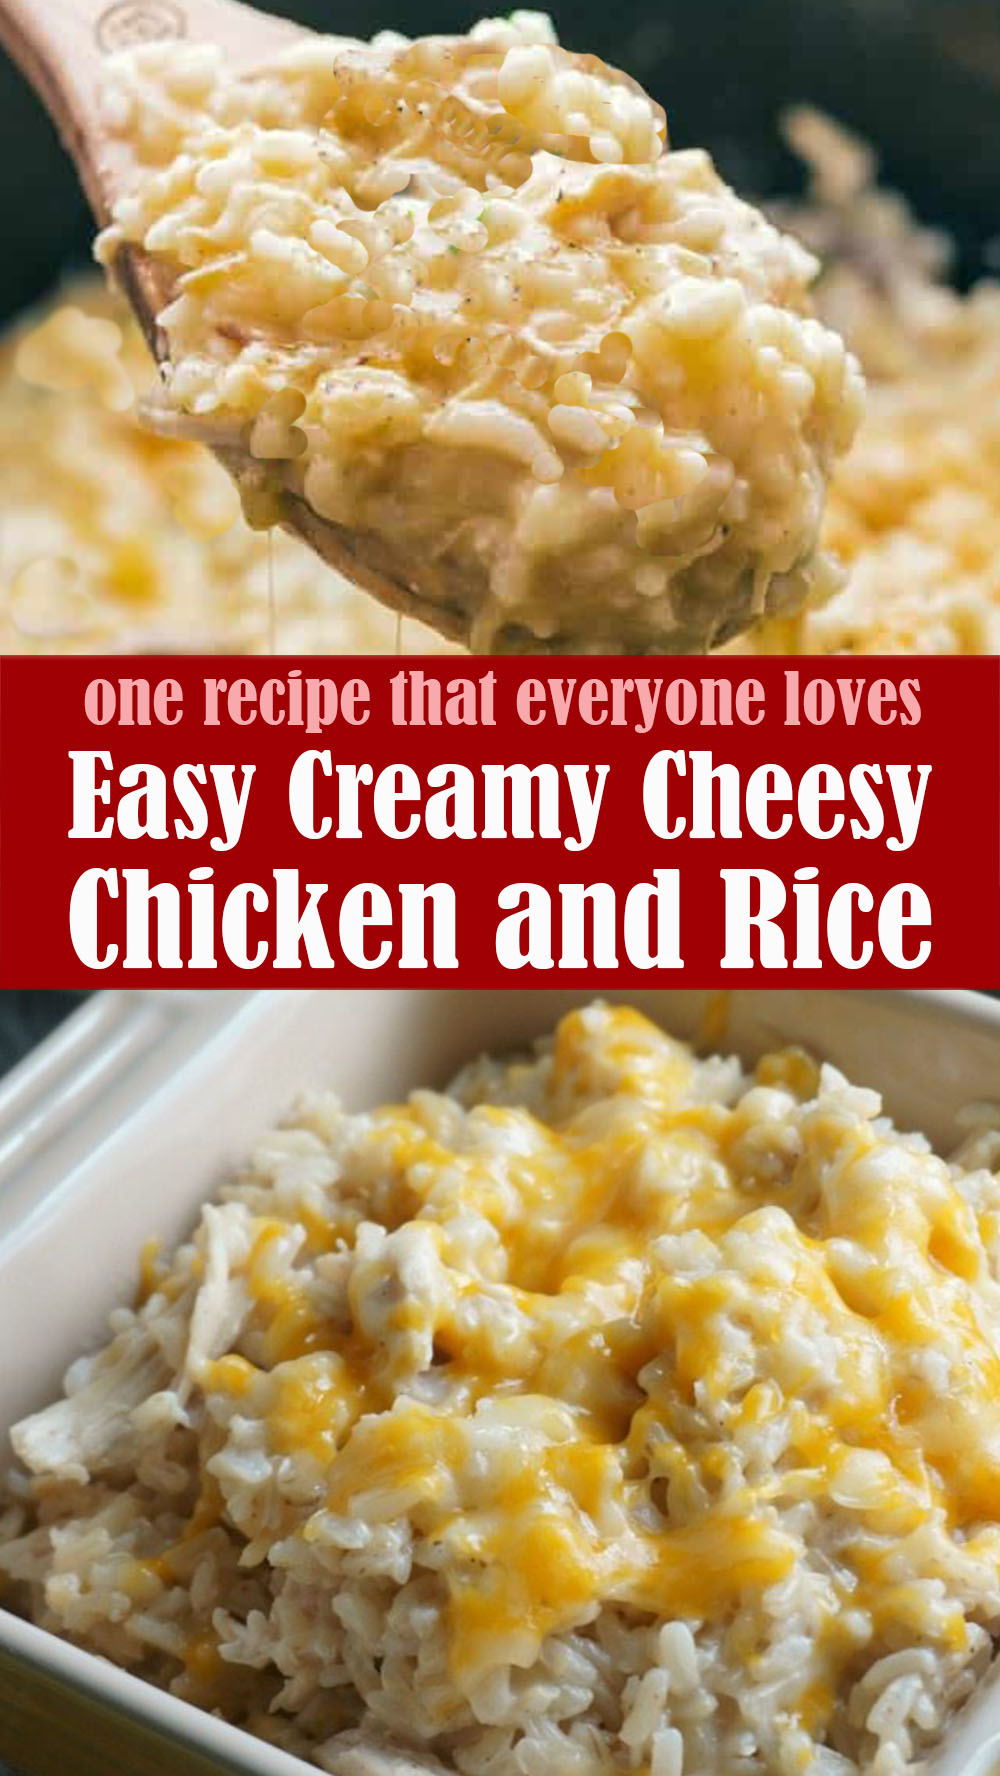 Easy Creamy Cheesy Chicken and Rice